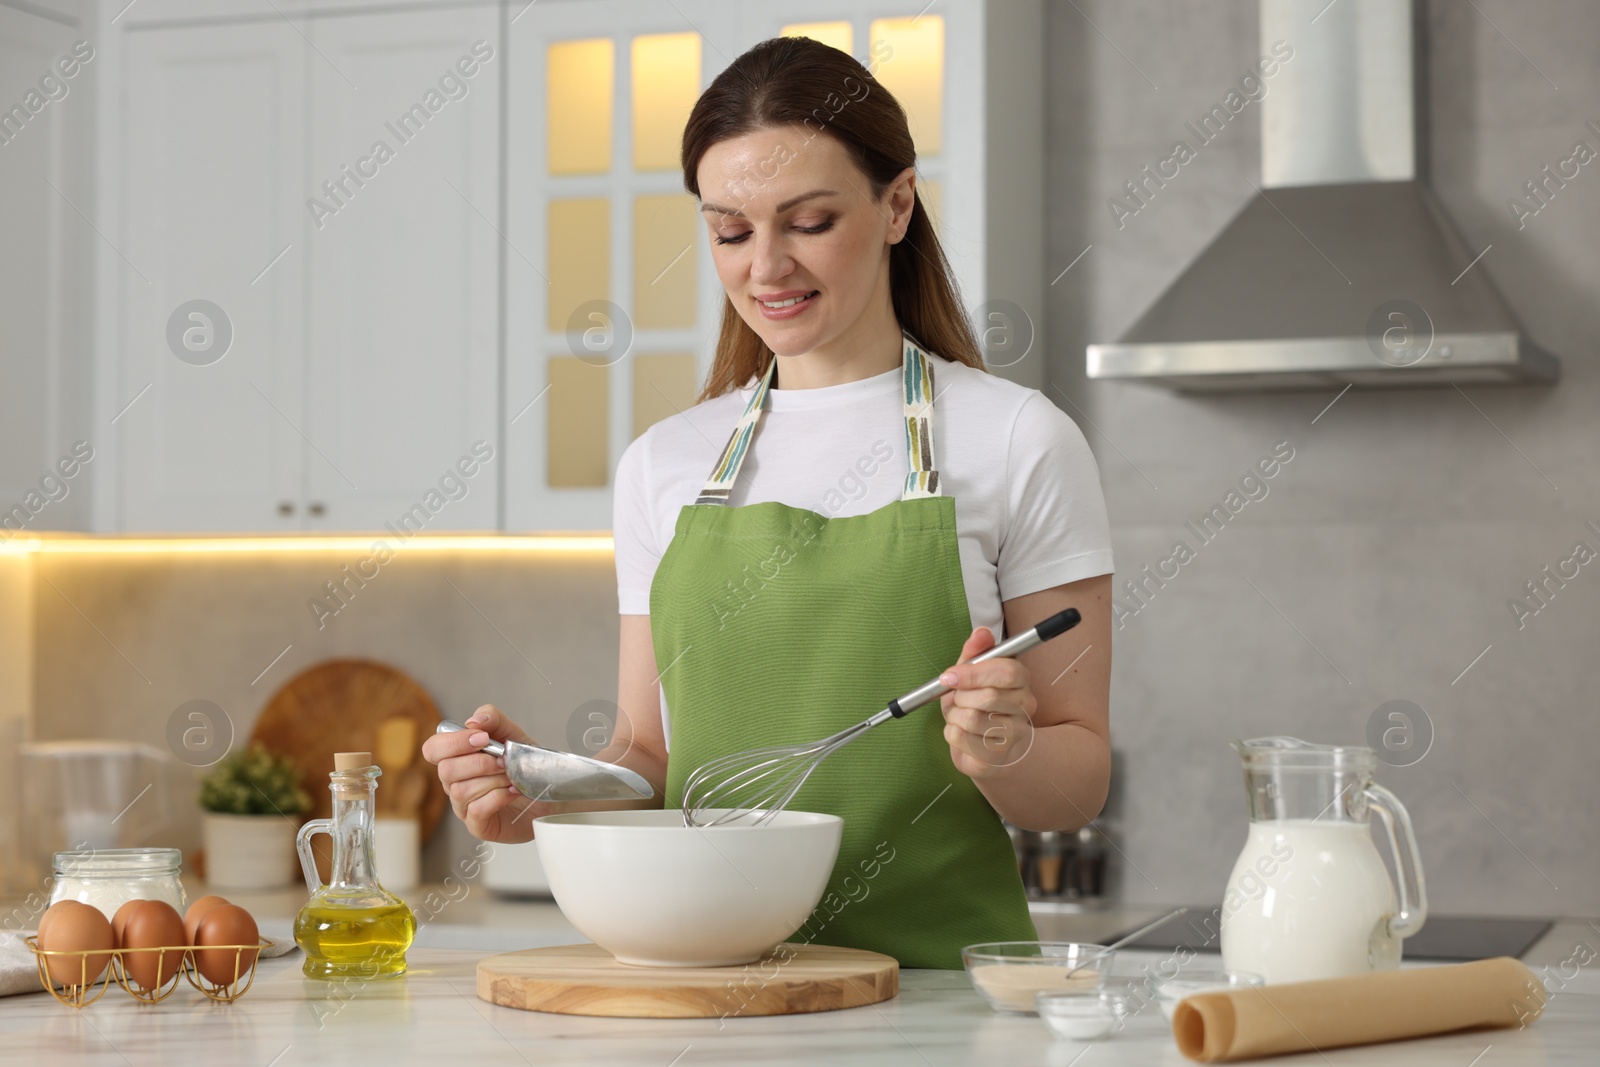 Photo of Making bread. Woman putting flour into bowl at white table in kitchen